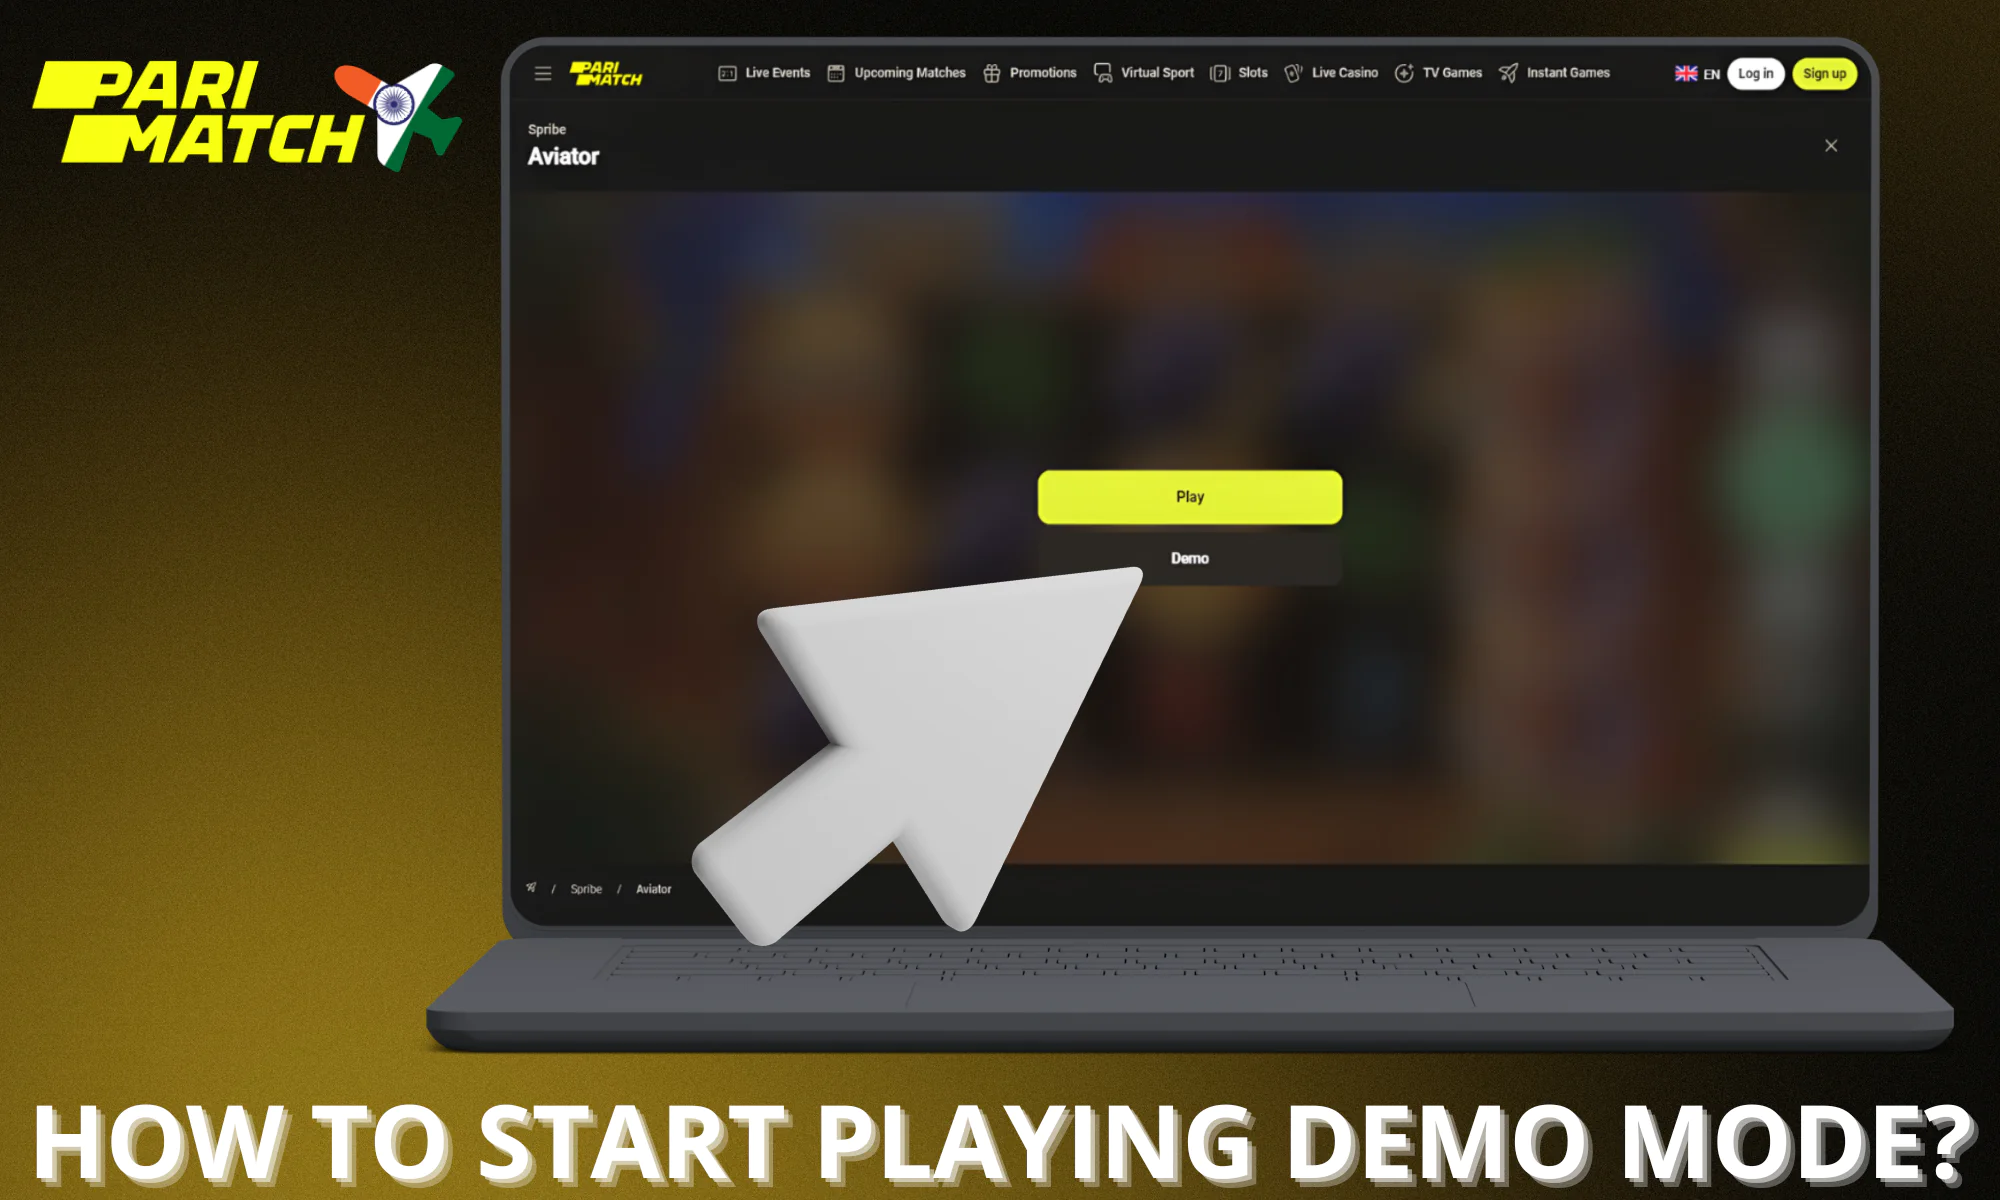 Step-by-step instructions on how to start playing the Aviator demo